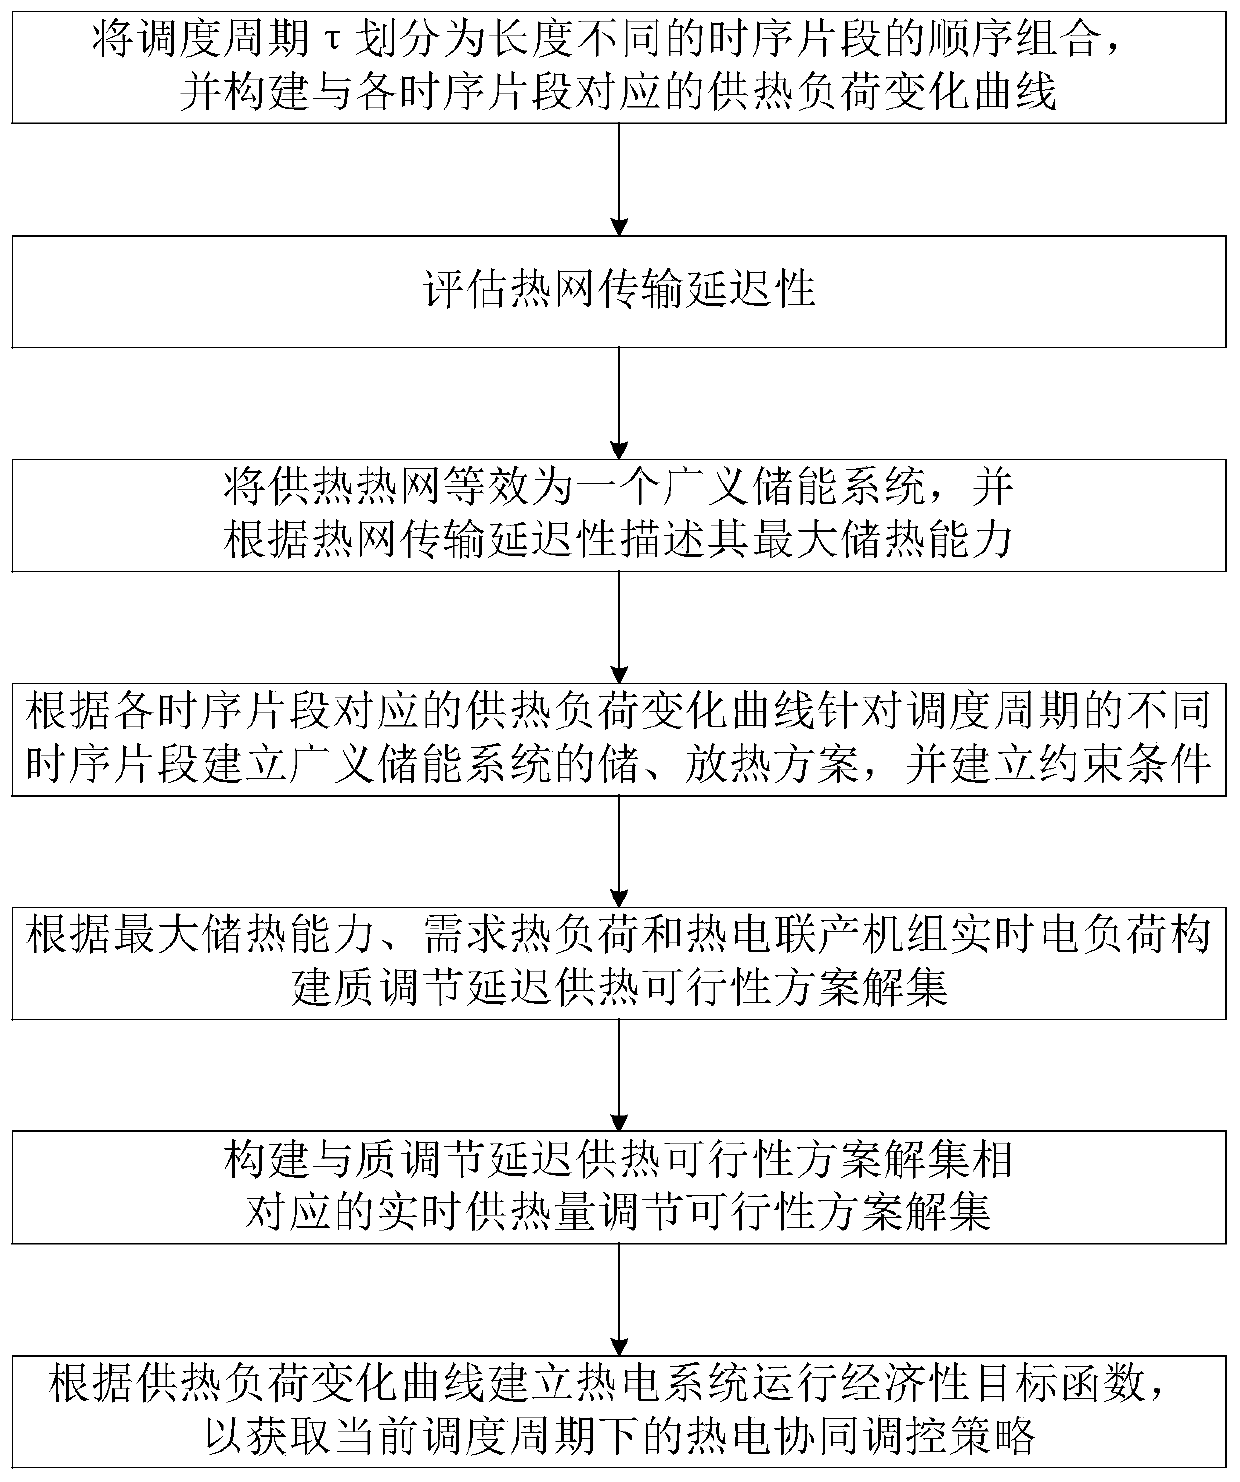 Thermoelectric cooperative regulation and control method and system based on heat supply network transmission time delay and heat storage characteristics